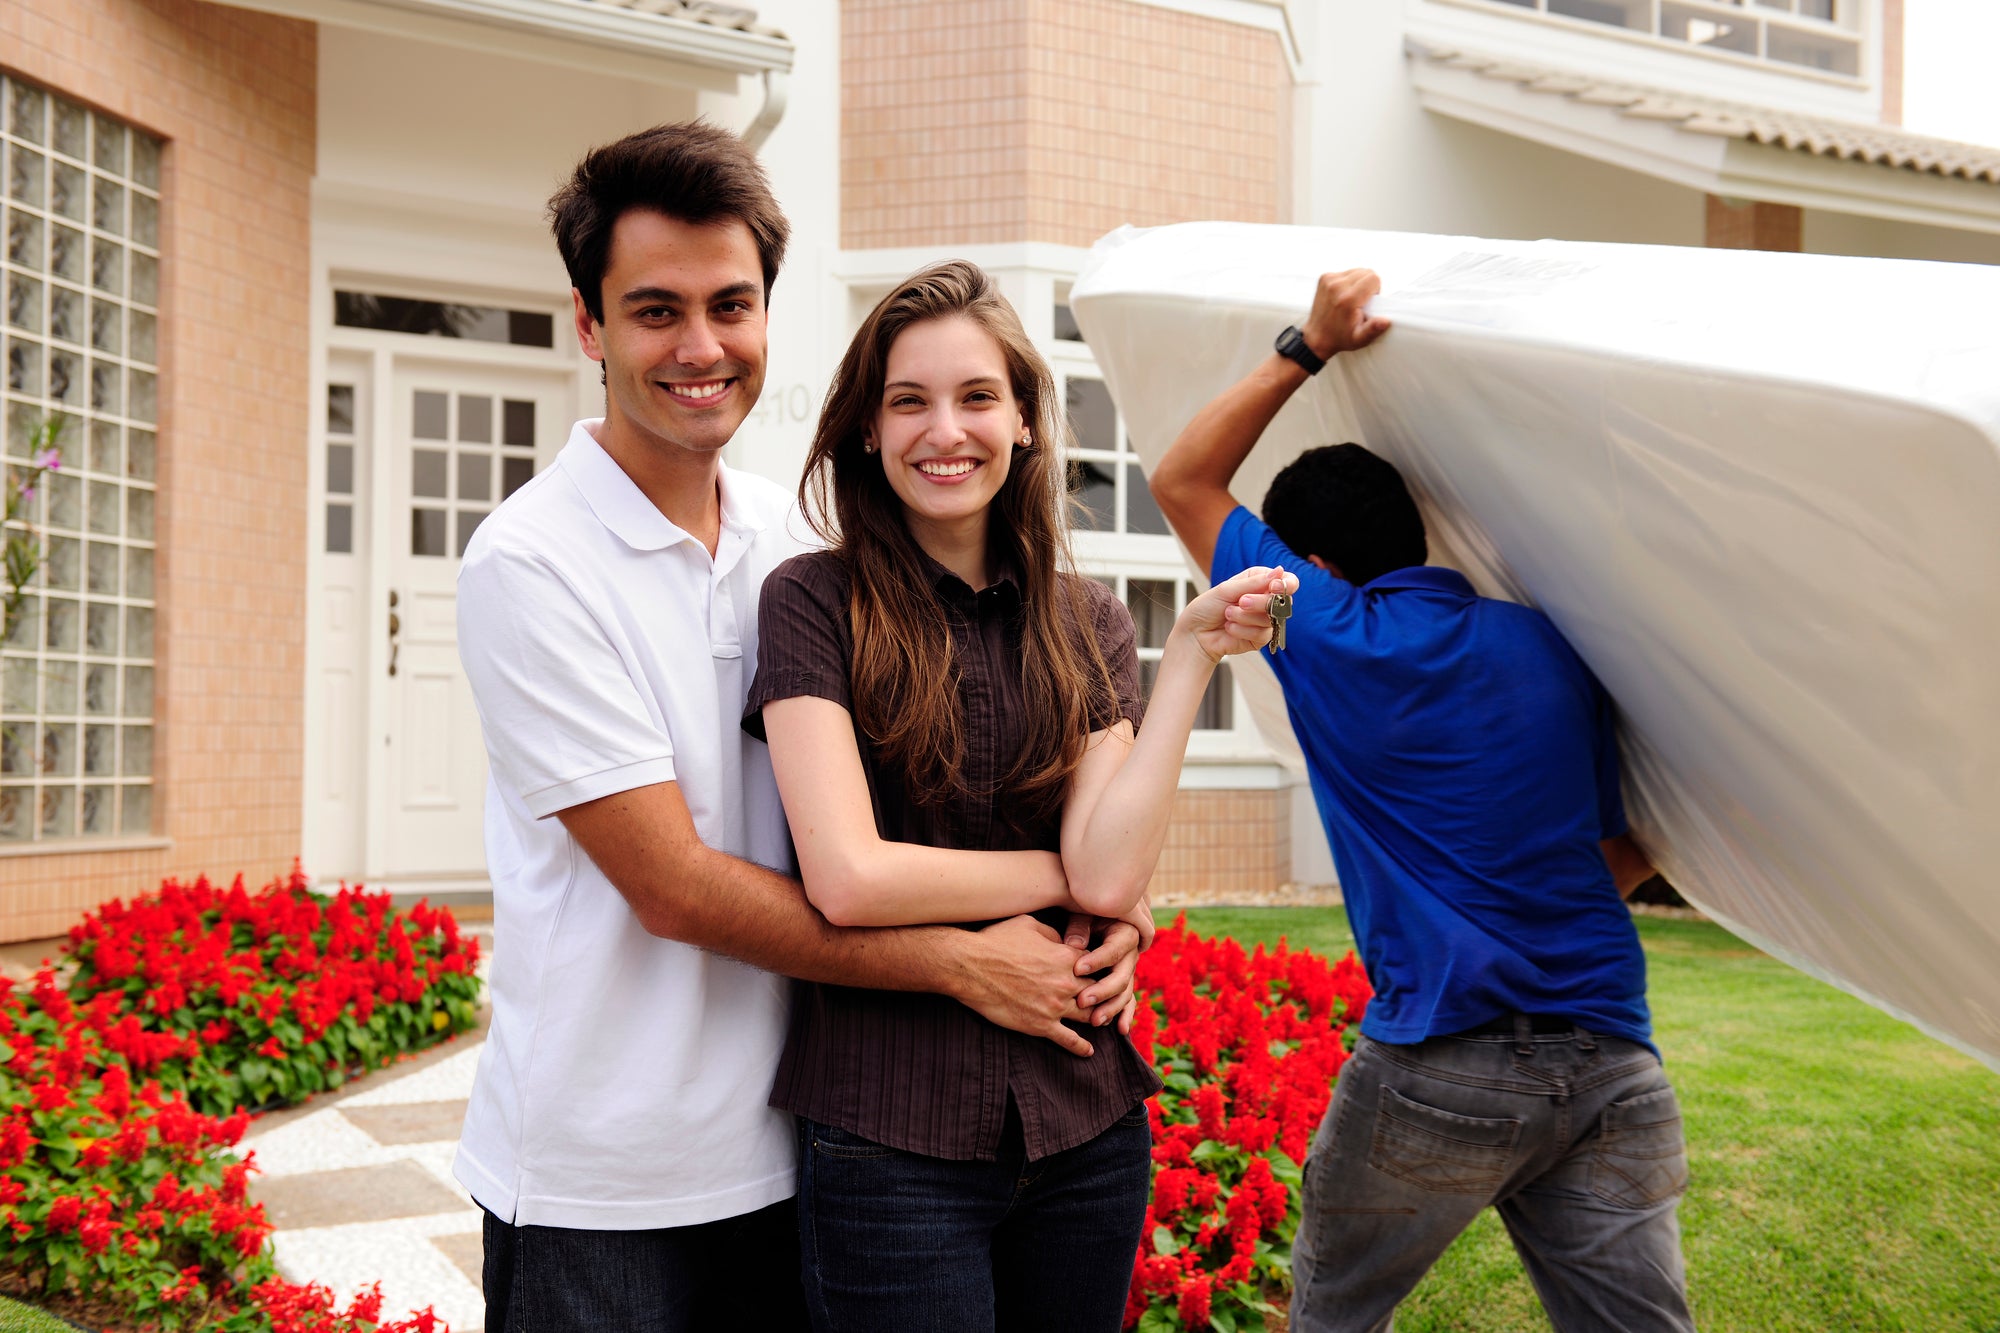 How to Ship a Mattress When Moving to a New Home